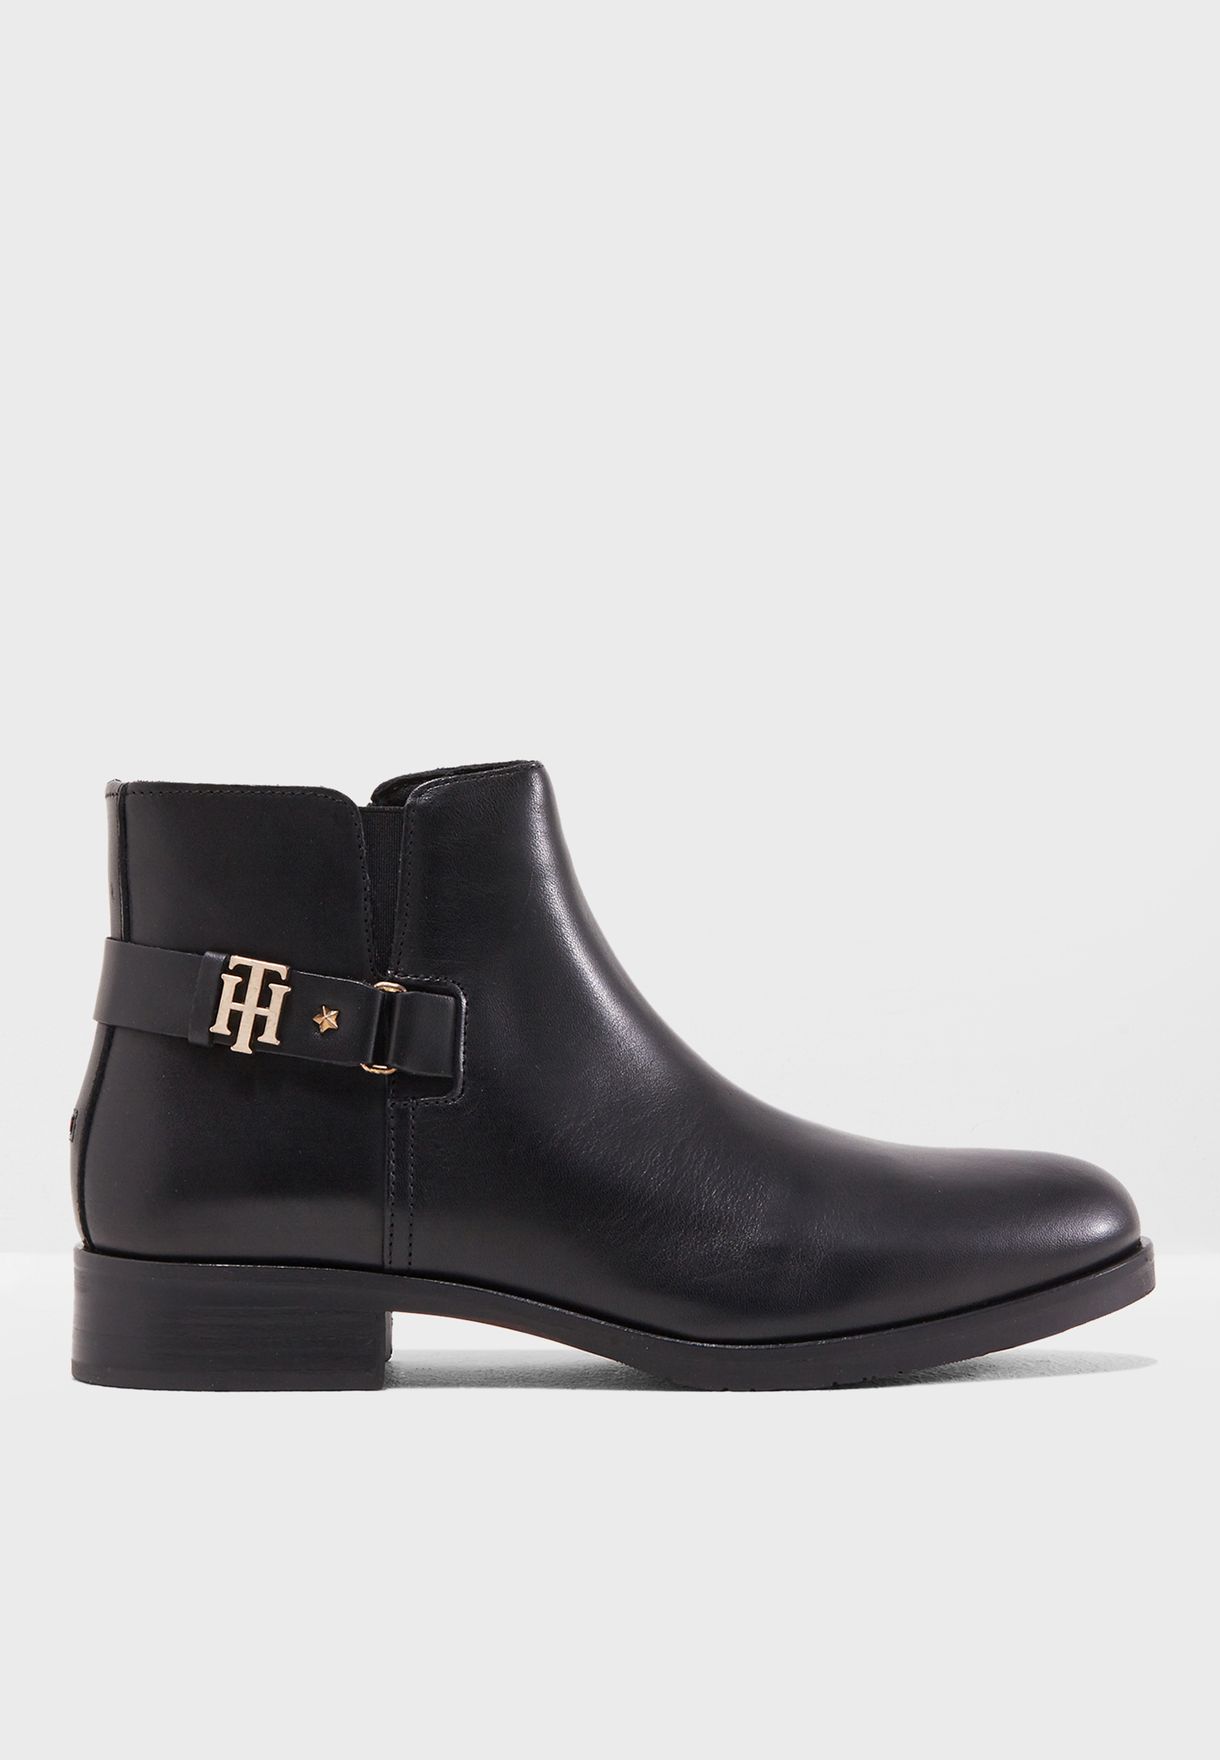 TH Buckle Leather Bootie 